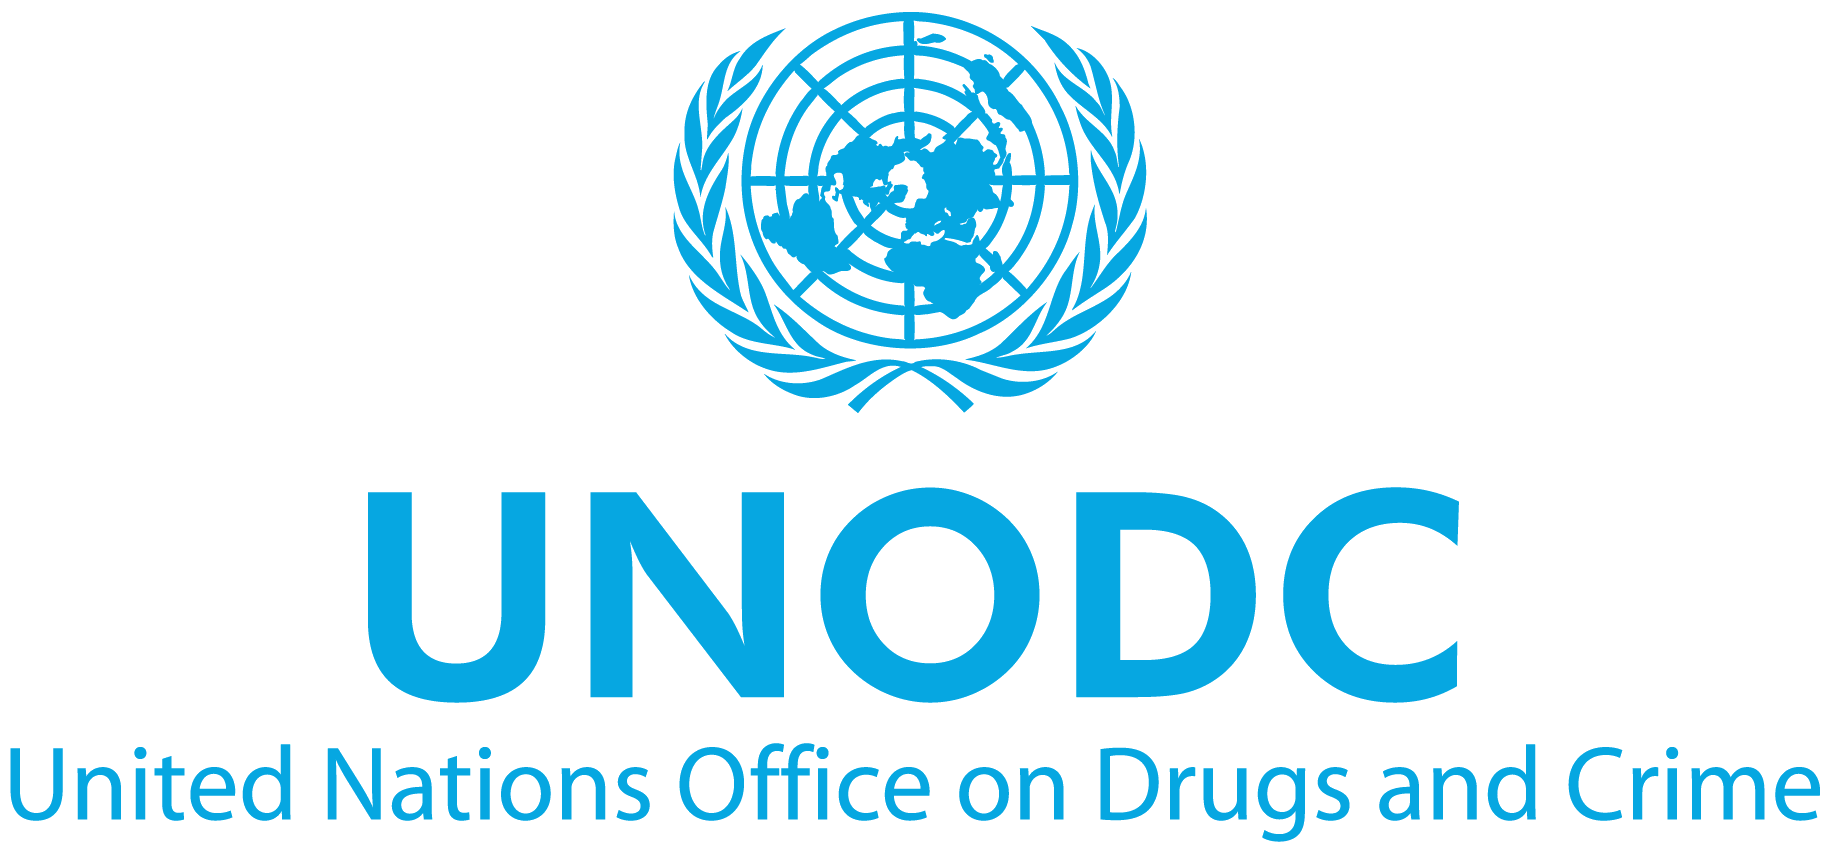 The United Nations Office on Drugs and Crime (UNODC) is a global leader in the fight against illicit drugs and international crime.
The Office was established in 1997 as a result of the merger of the United Nations Drug Control Program and the Centre for the Prevention of International Crime. The organization provides support to Member States in the fight against illicit drugs, crime and terrorism.
